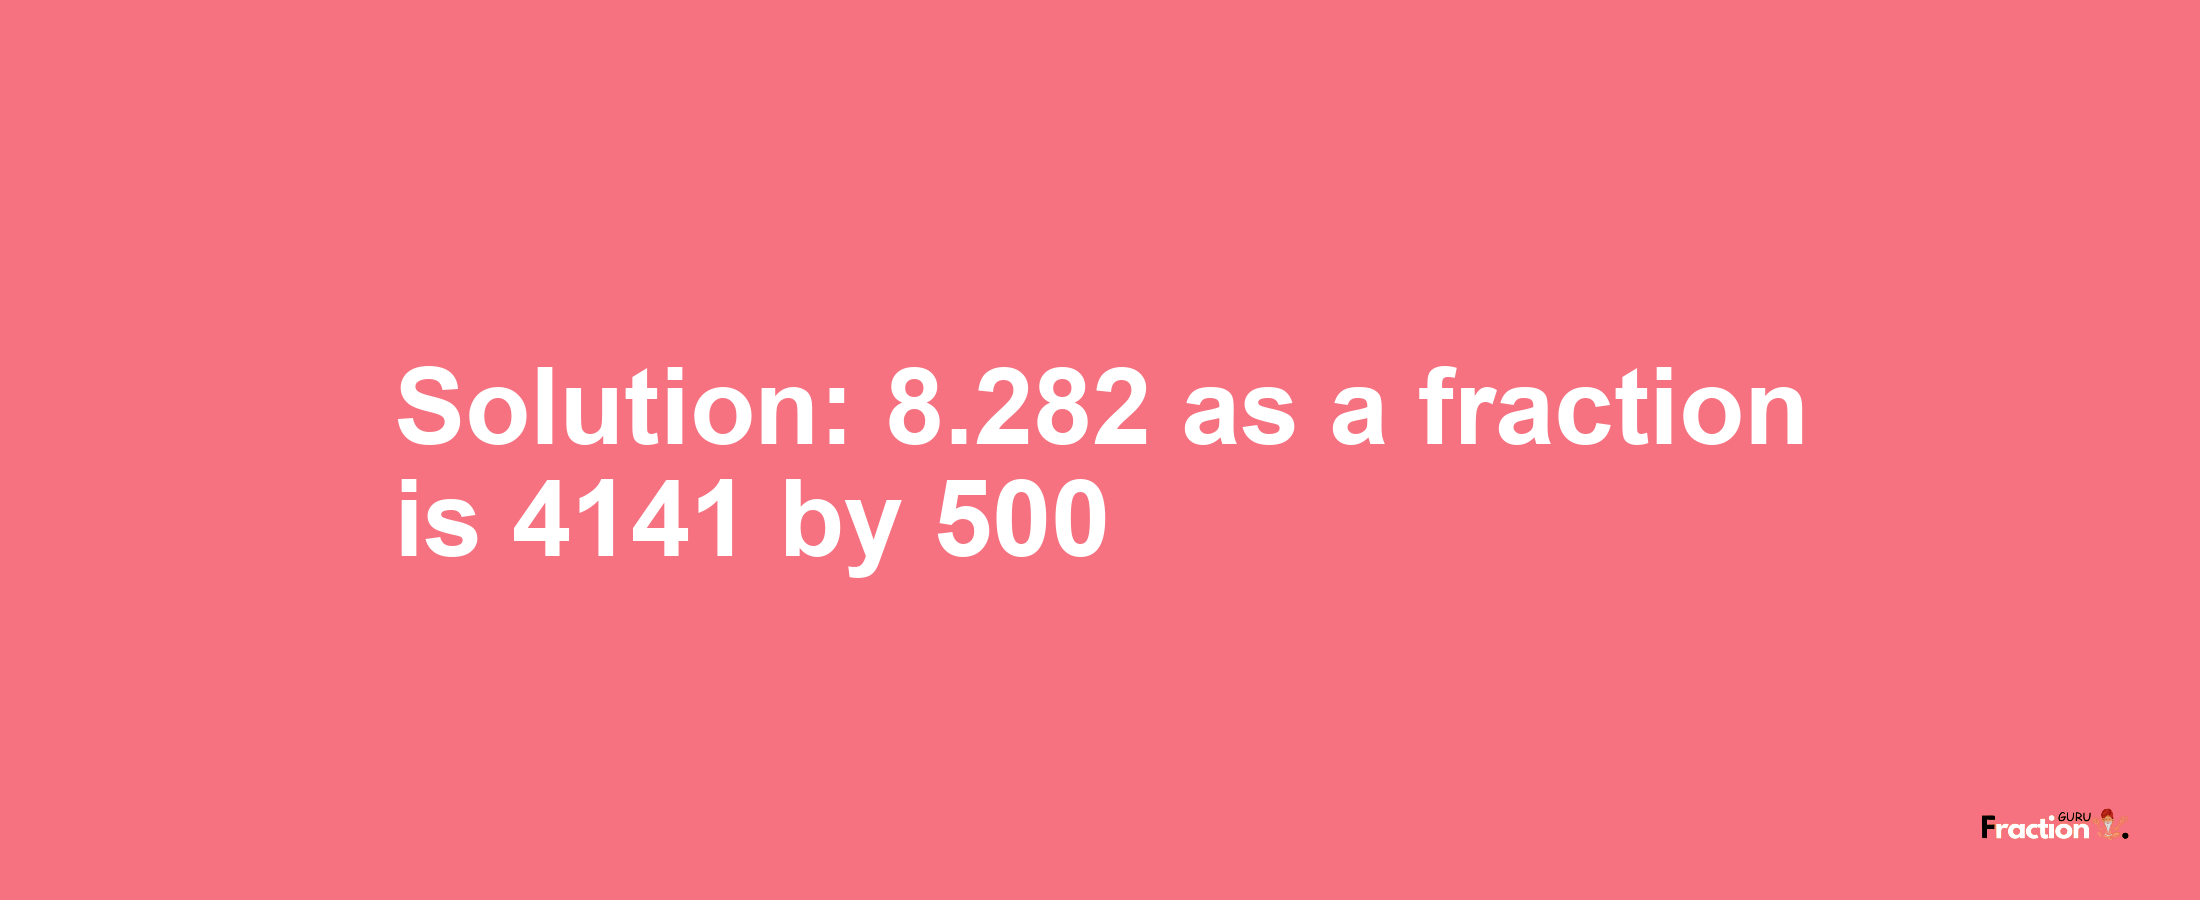 Solution:8.282 as a fraction is 4141/500